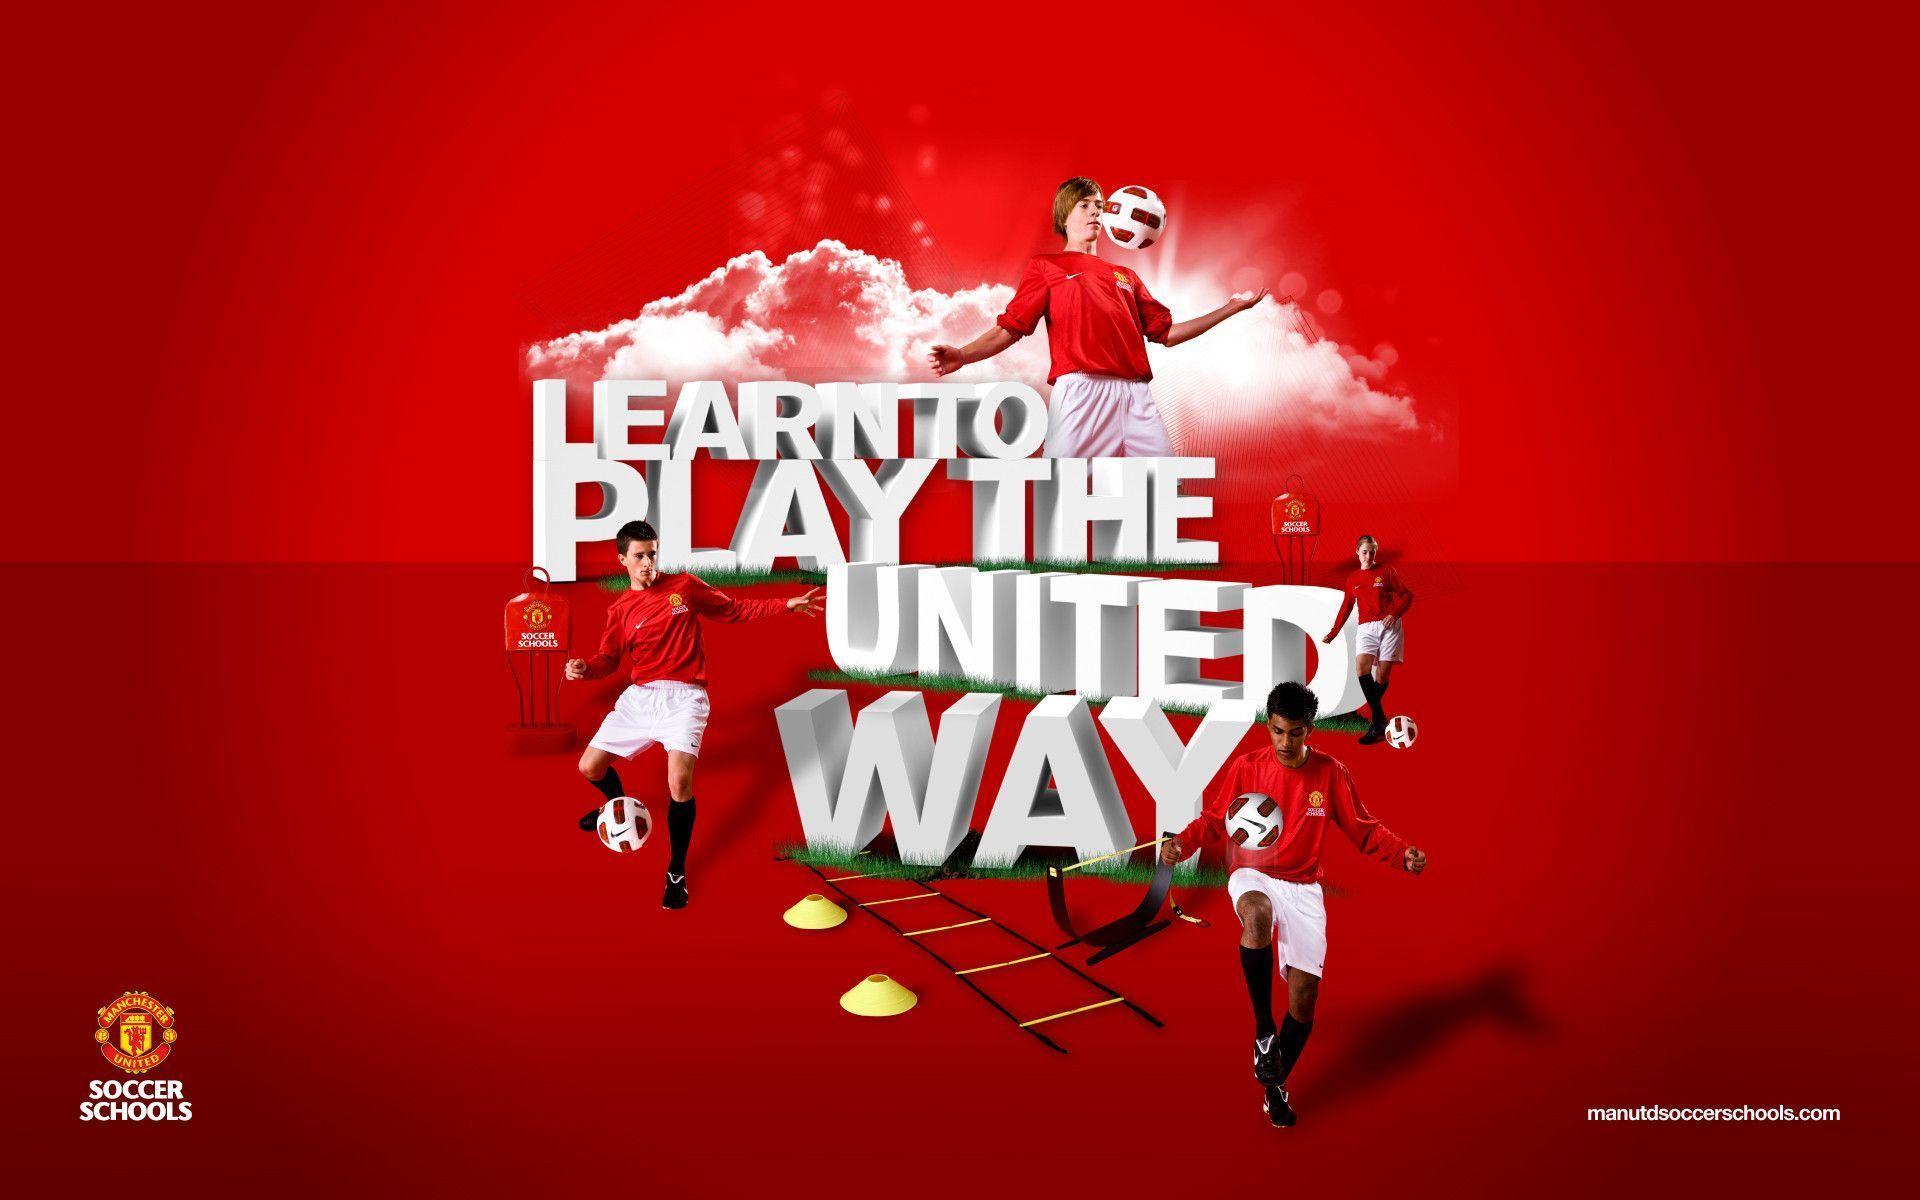 Beloved Manchester United wallpaper and image